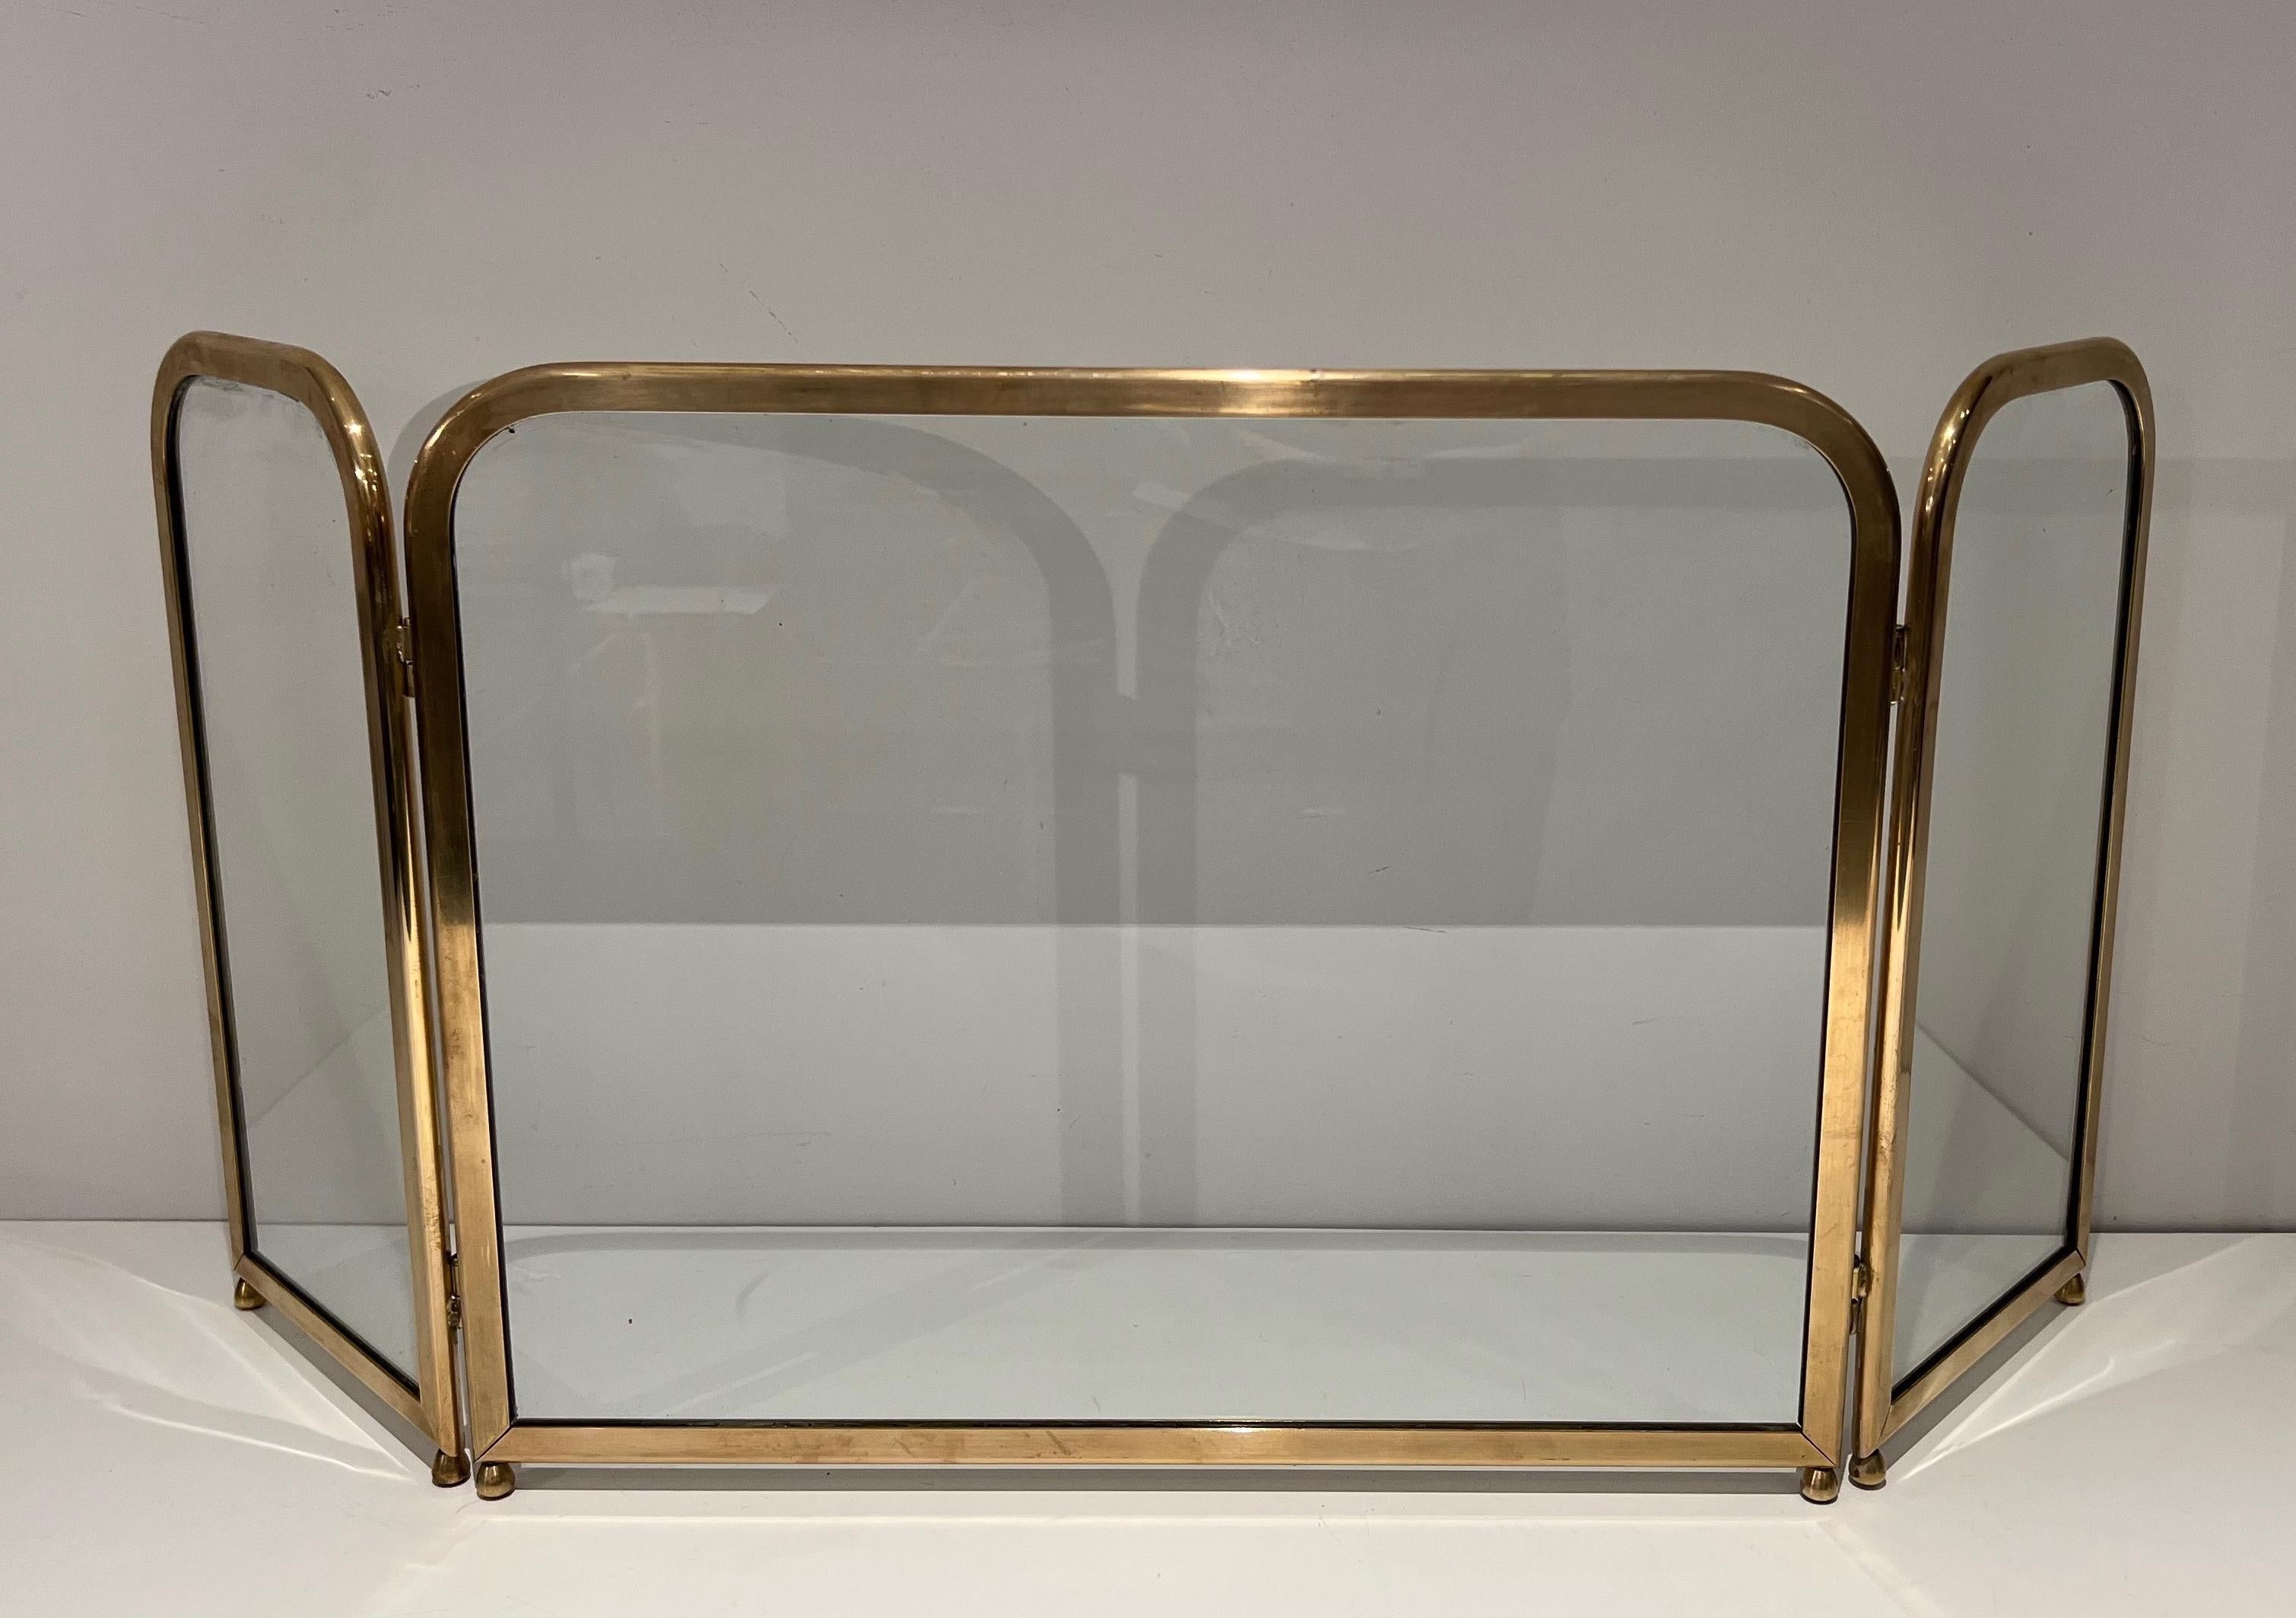 This very nice fireplace screen is made of 3 glass panels surrounded by a brass frame. This is a French work. Circa 1970